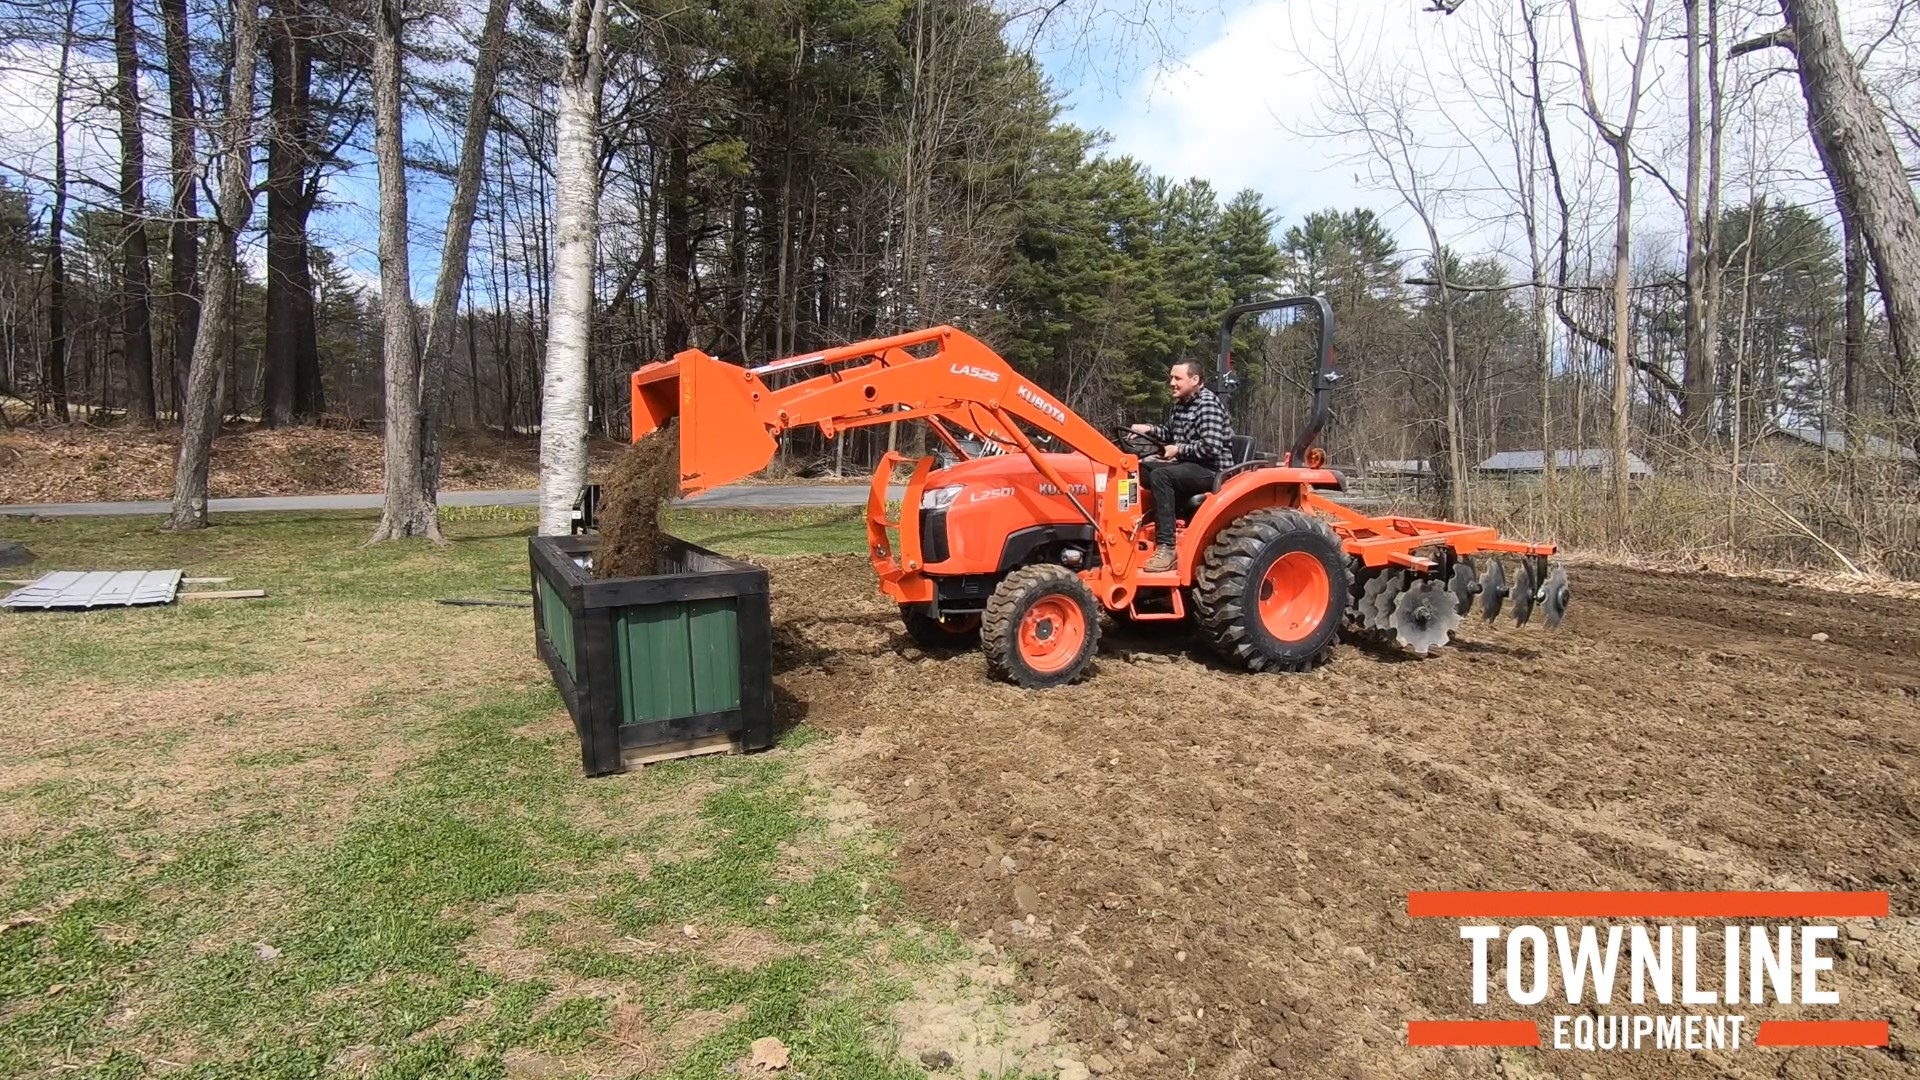 Kubota L2501 Compact Tractor Using a Disc Harrow and Building a Raised Garden Bed